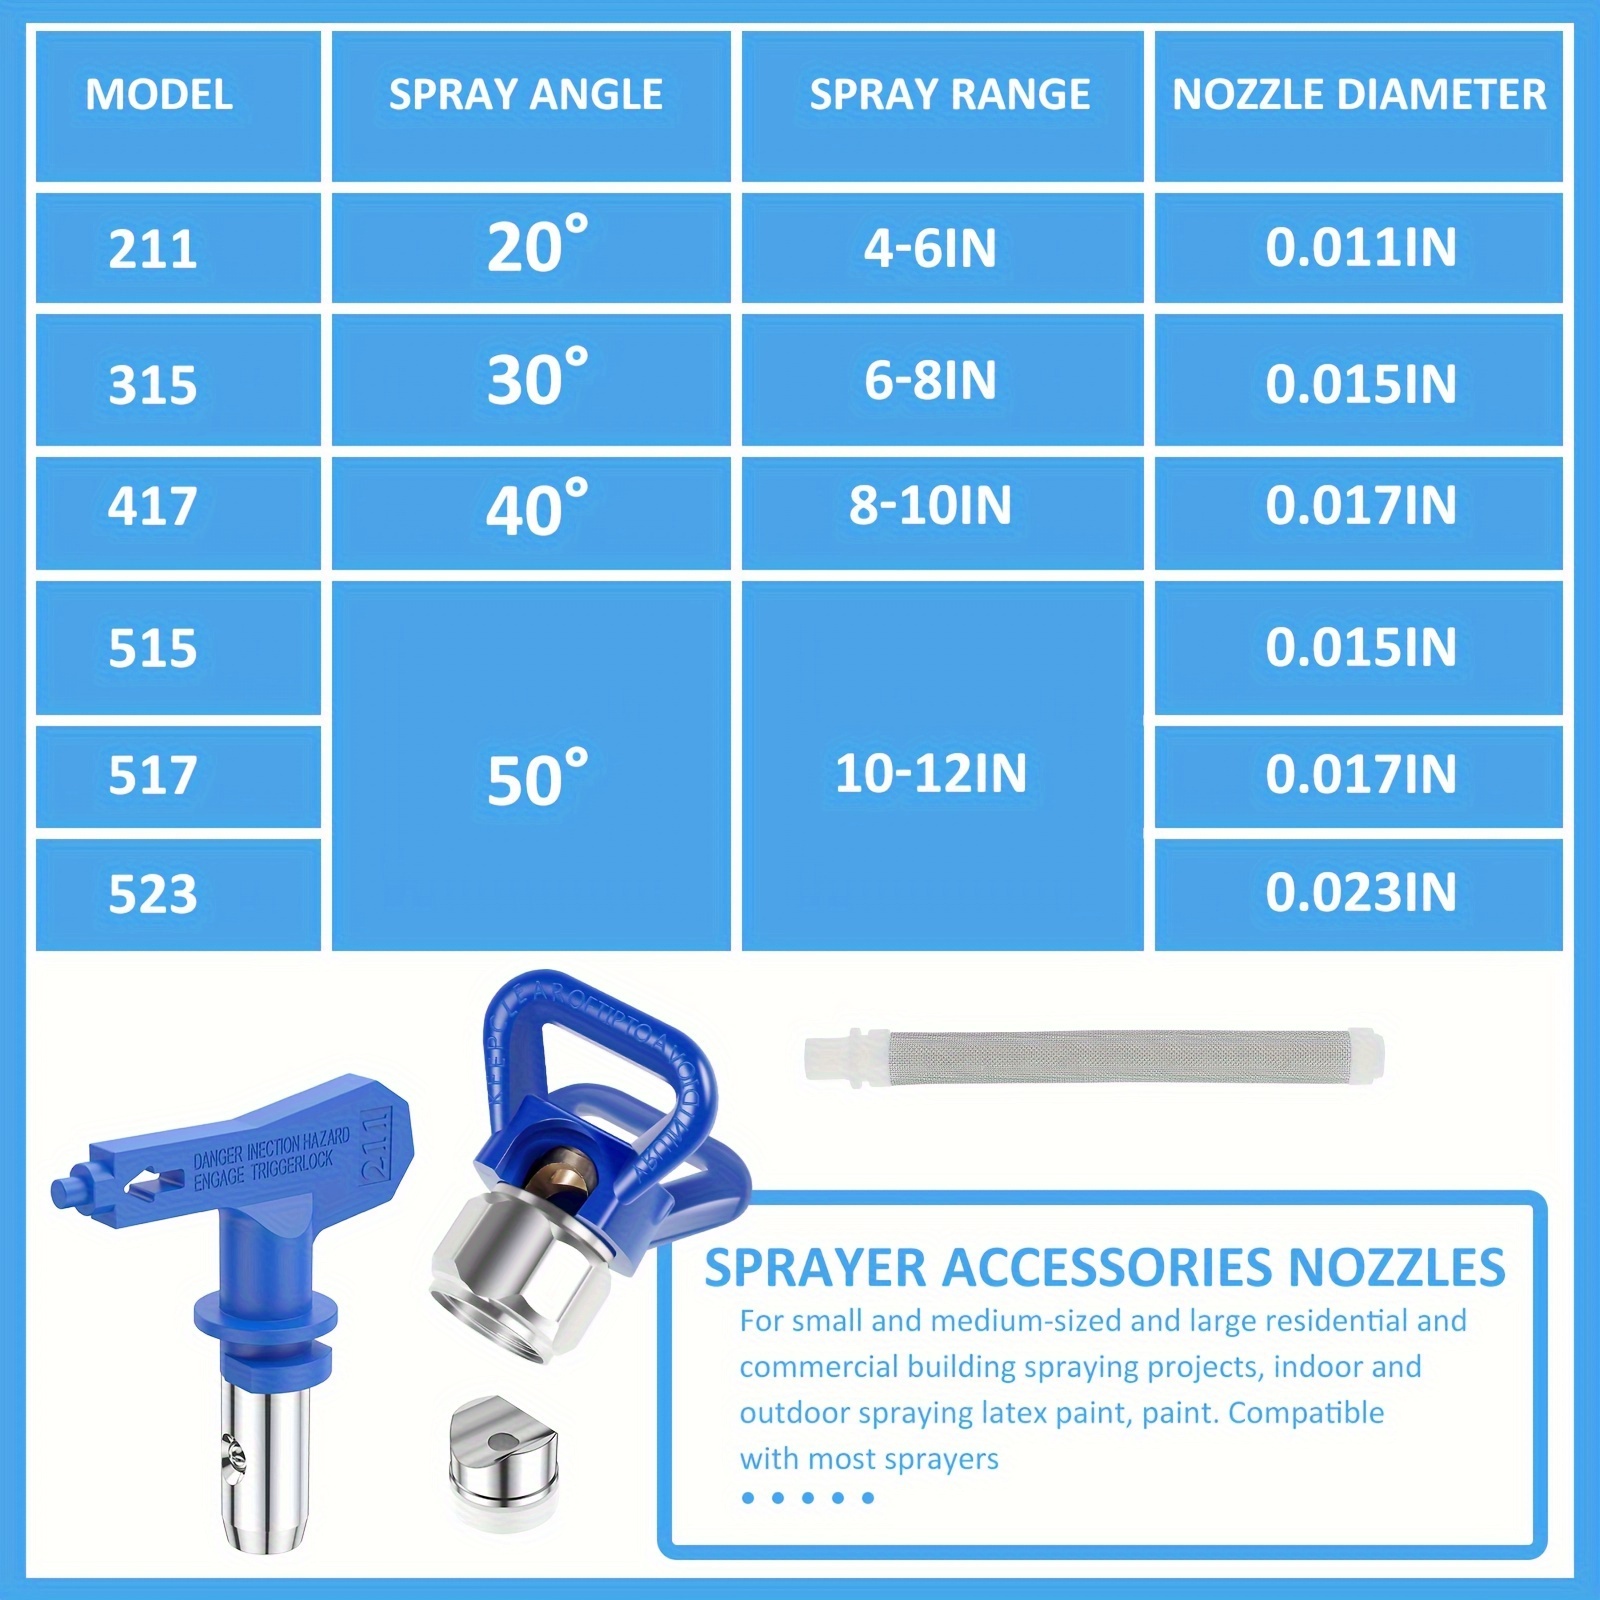  Reversible Spray Tip Nozzles Paint Spray Tips Airless Sprayer  Nozzles Airless Sprayer Spraying Machine Parts in Blue for Homes Buildings  Decks or Fences（2 Pieces, 313, 413） : Tools & Home Improvement